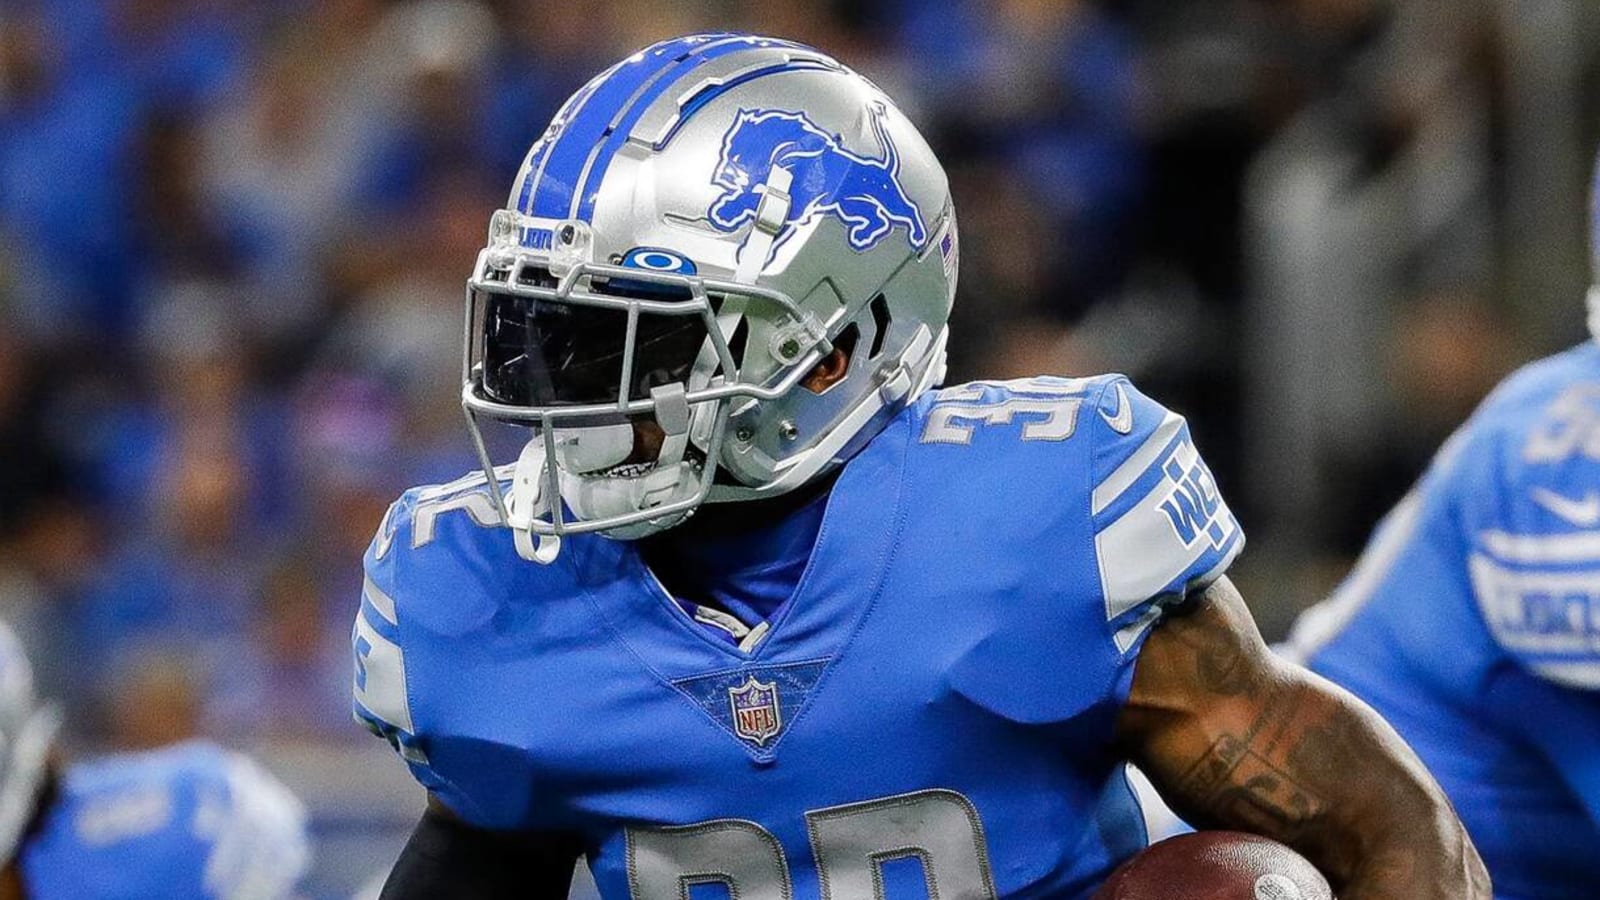 Report: Lions RB D’Andre Swift likely to miss time with shoulder sprain